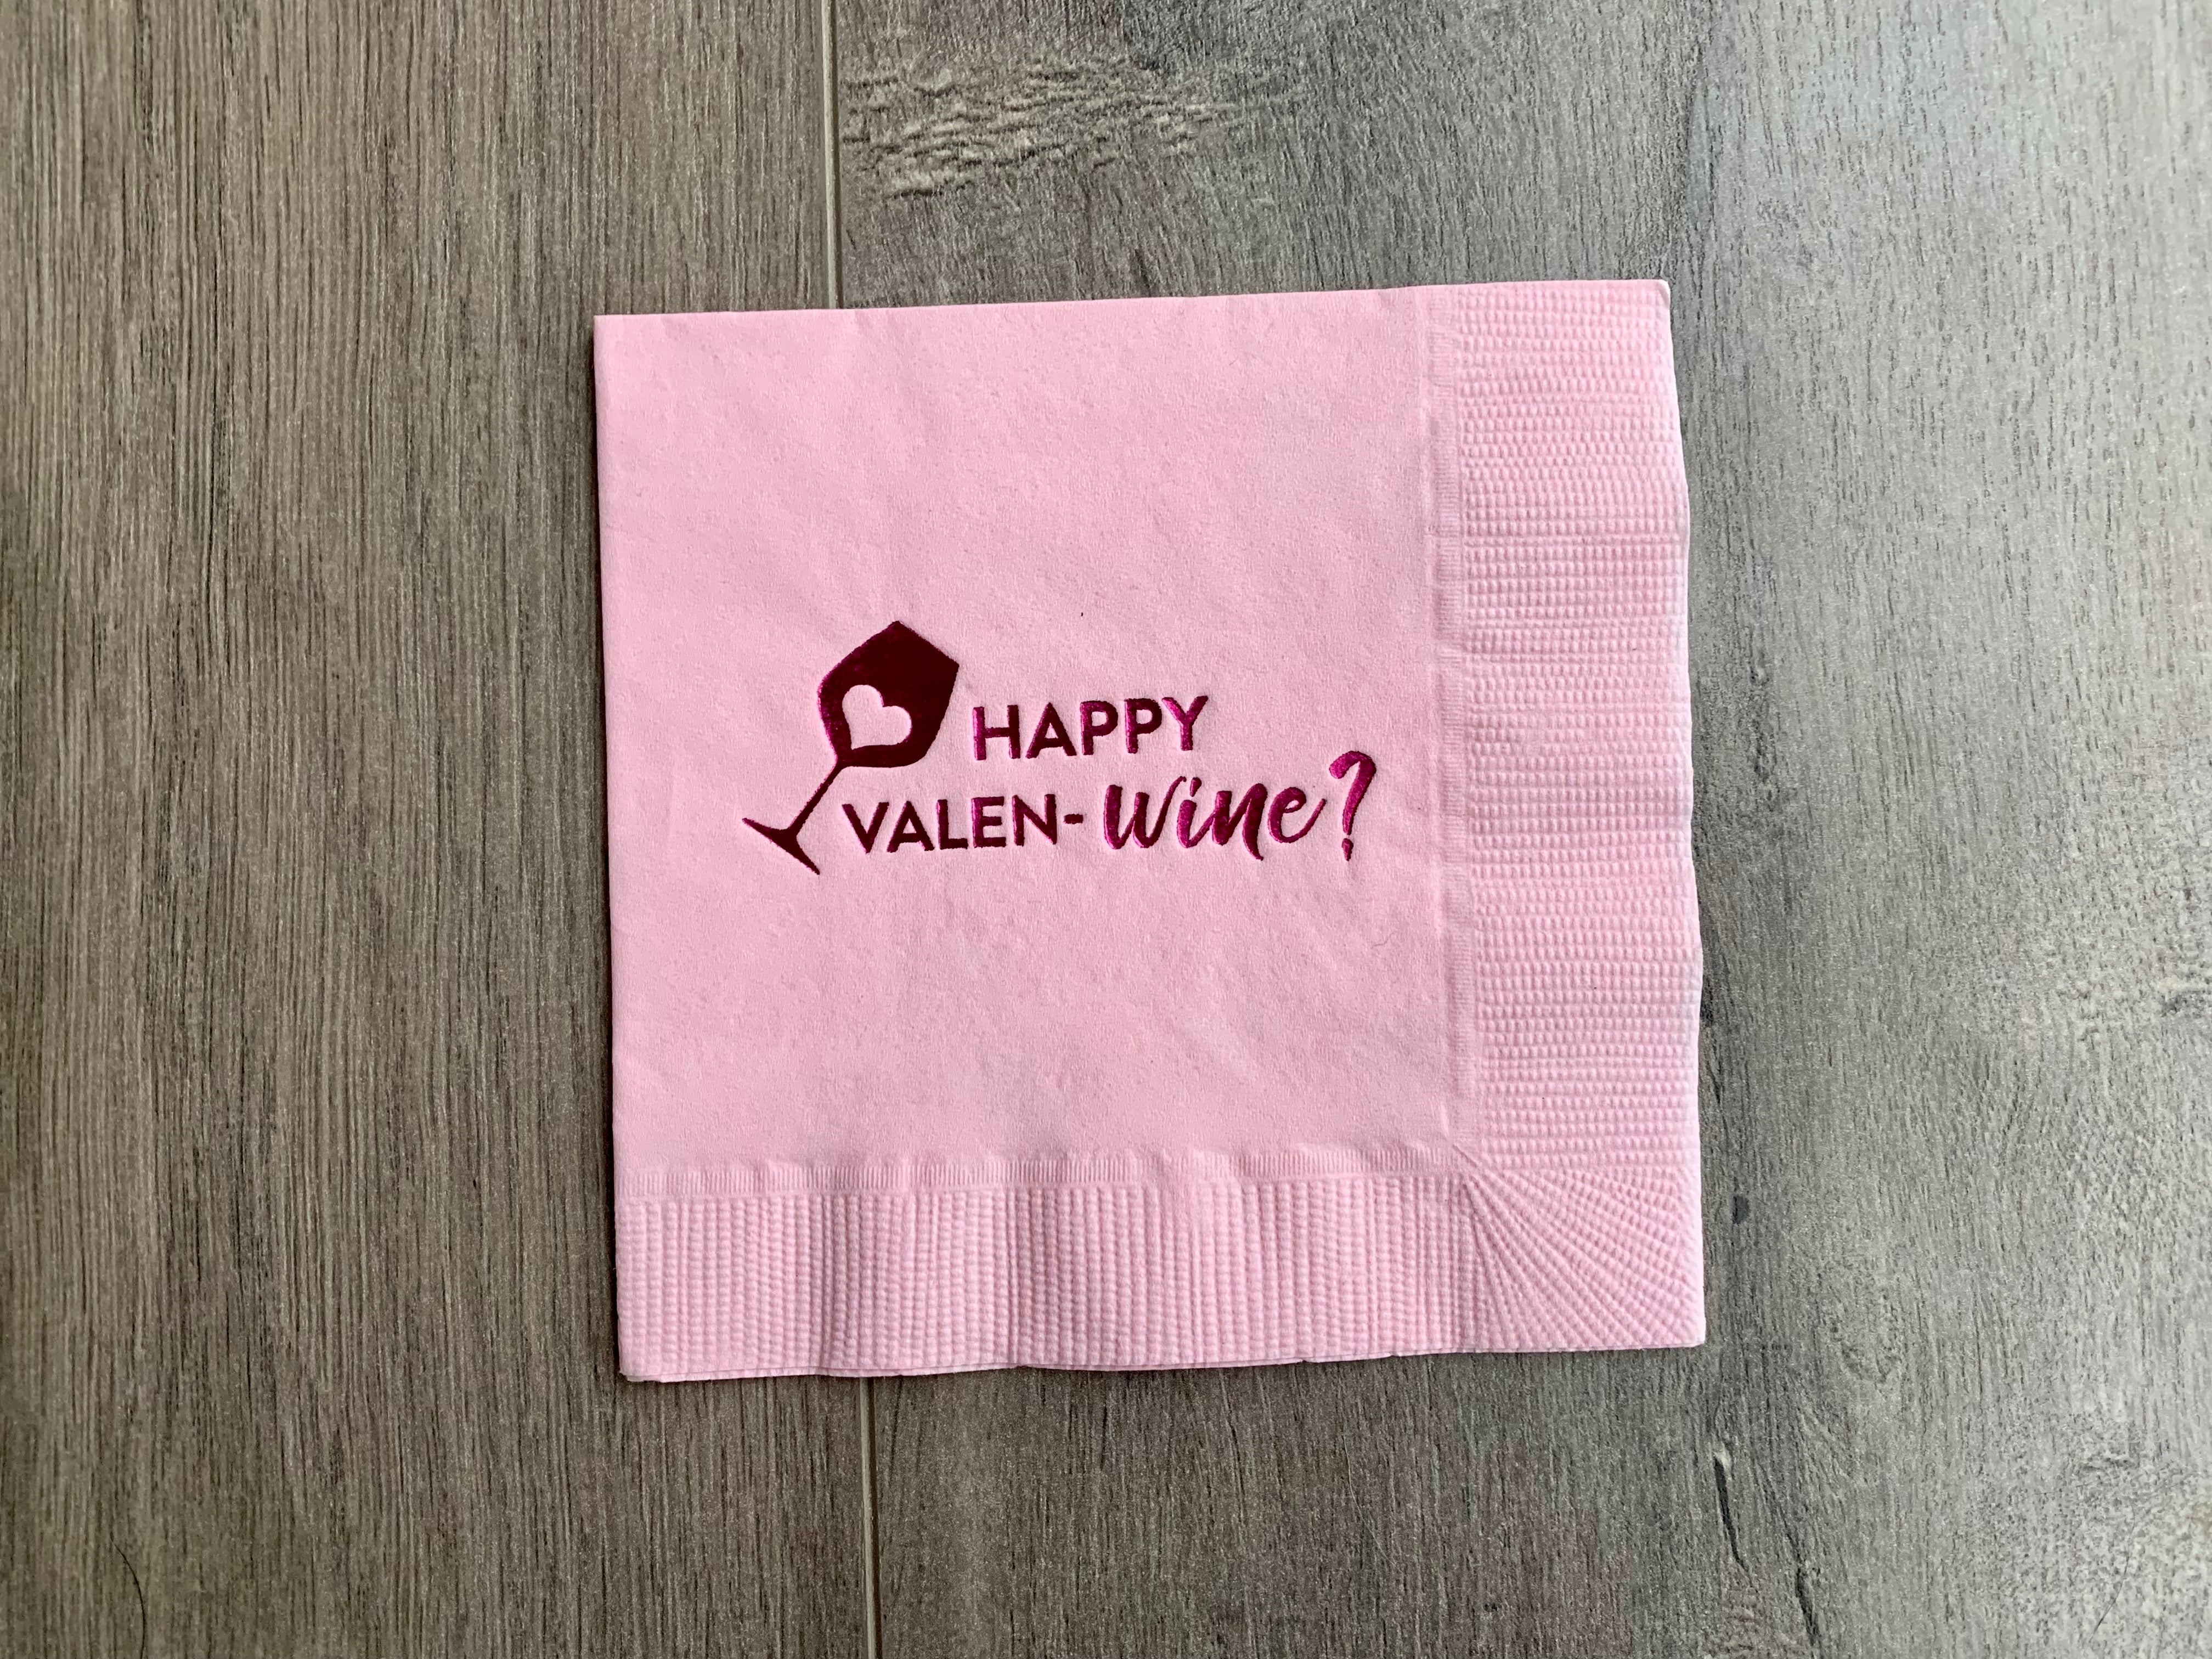 Pink Happy Valen-wine cocktail napkin with shiny magenta colored foil Valentine's Day napkin by Stationare